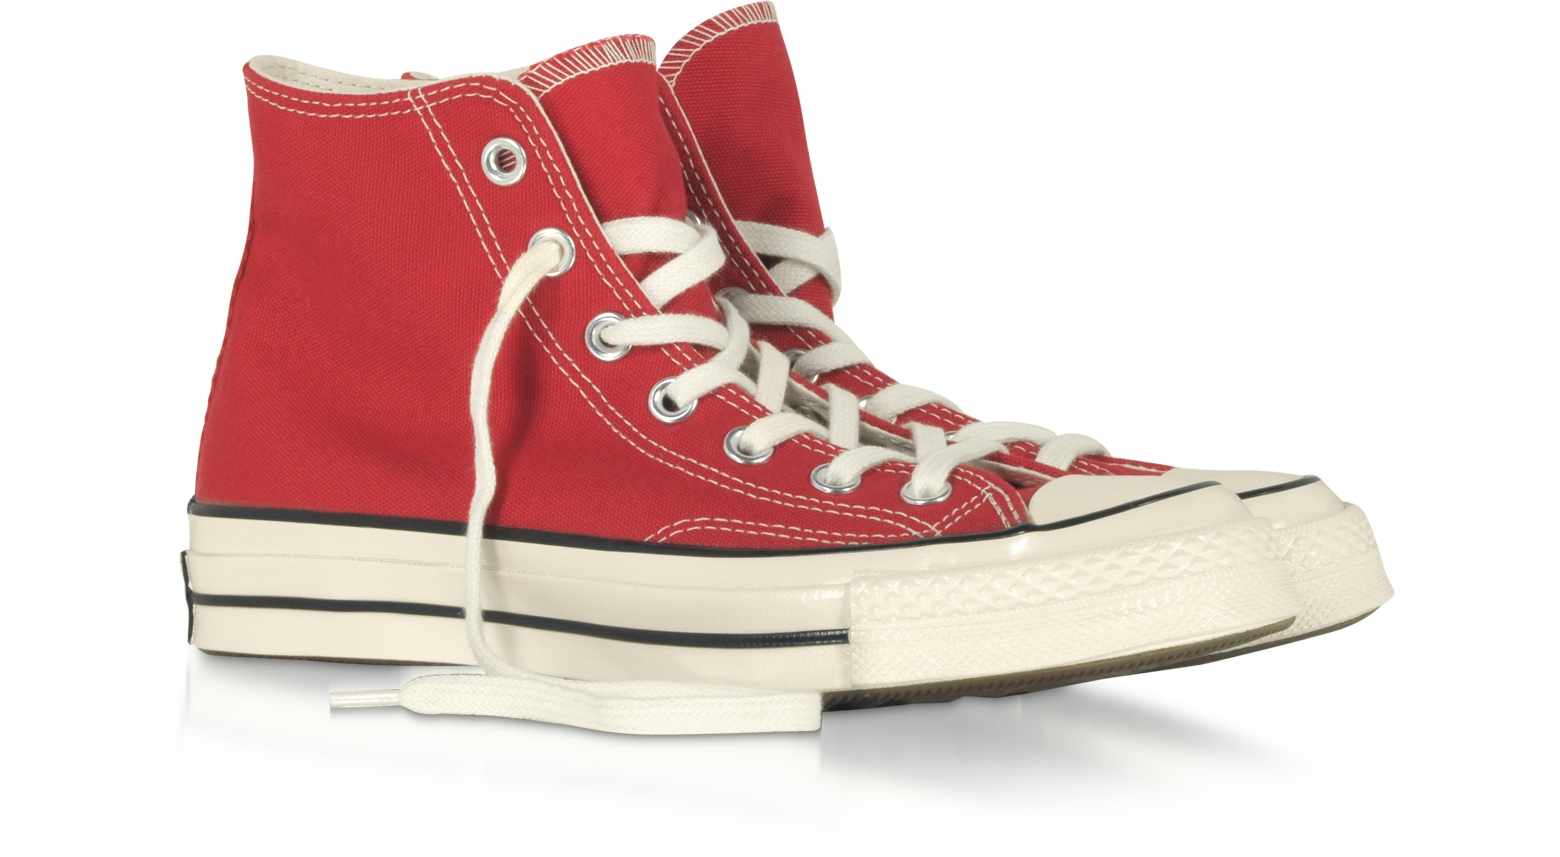 Citron Fælles valg pension Converse Limited Edition Red Chuck 70 w/ Vintage Canvas High Top 4.5 (6.5  WOMENS US | 4.5 UK | 37 EU) at FORZIERI